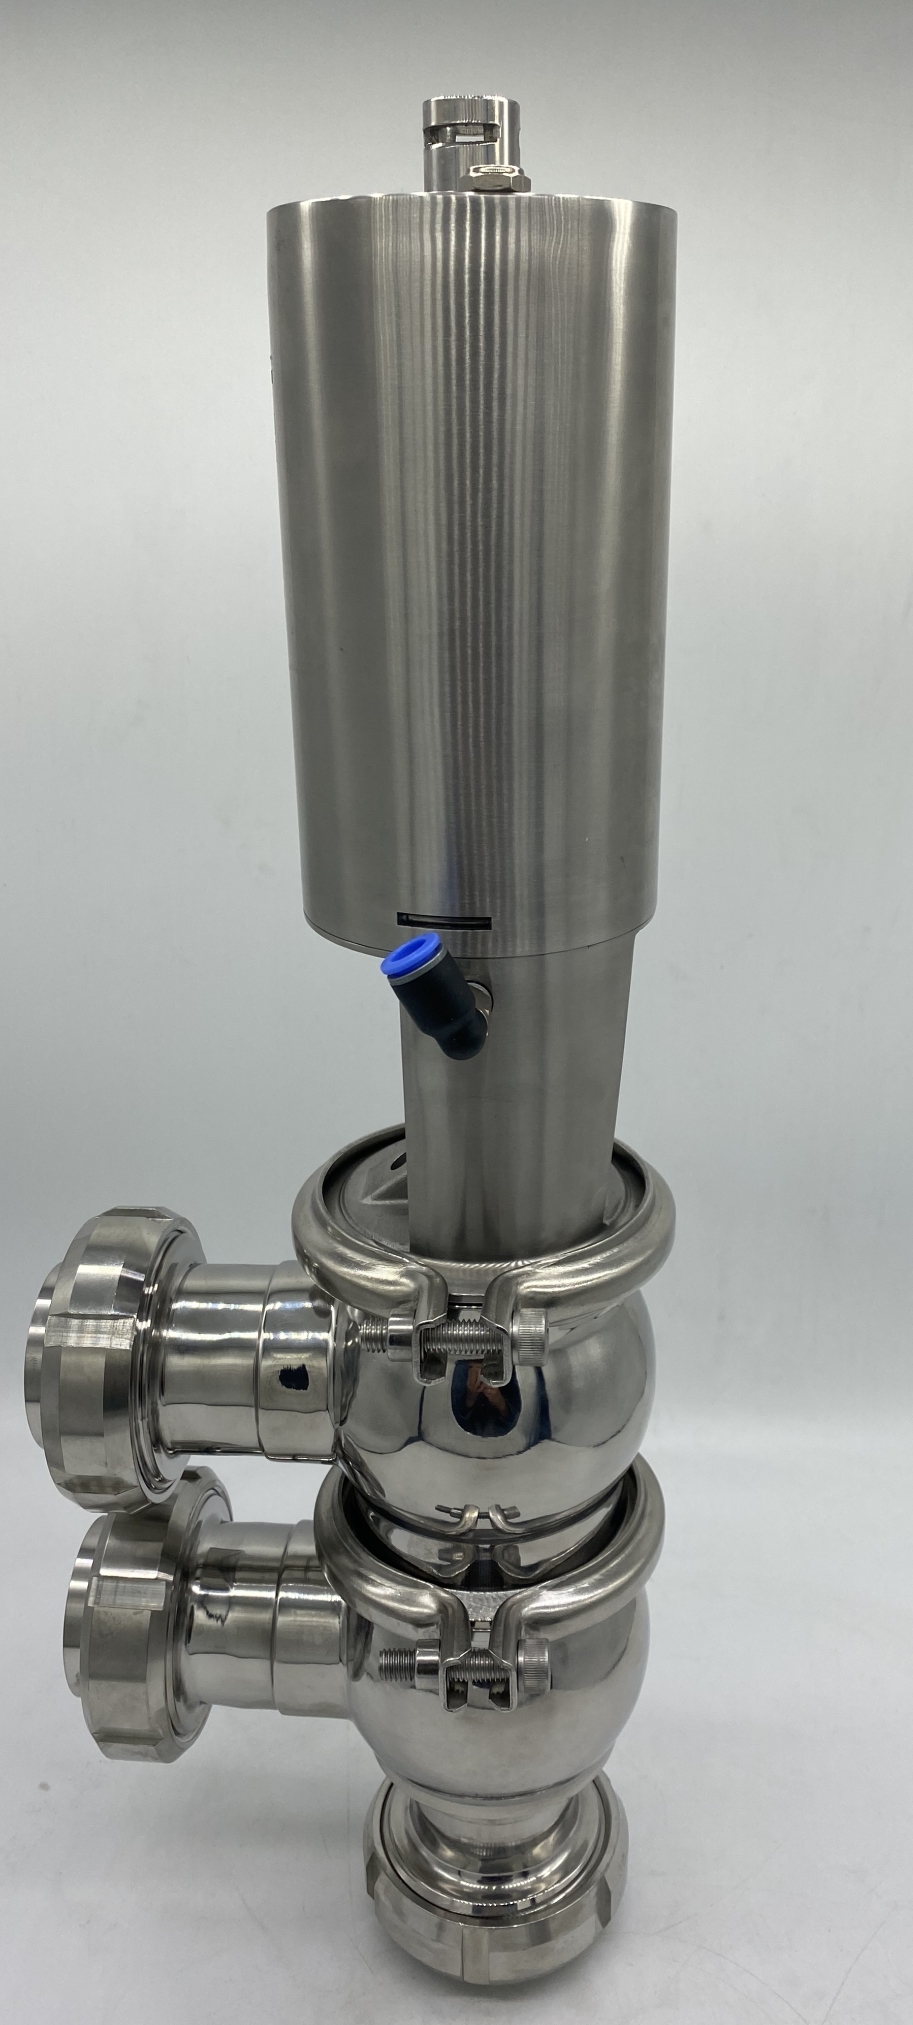 Pneumatic Stainless Steel Changeover Valve